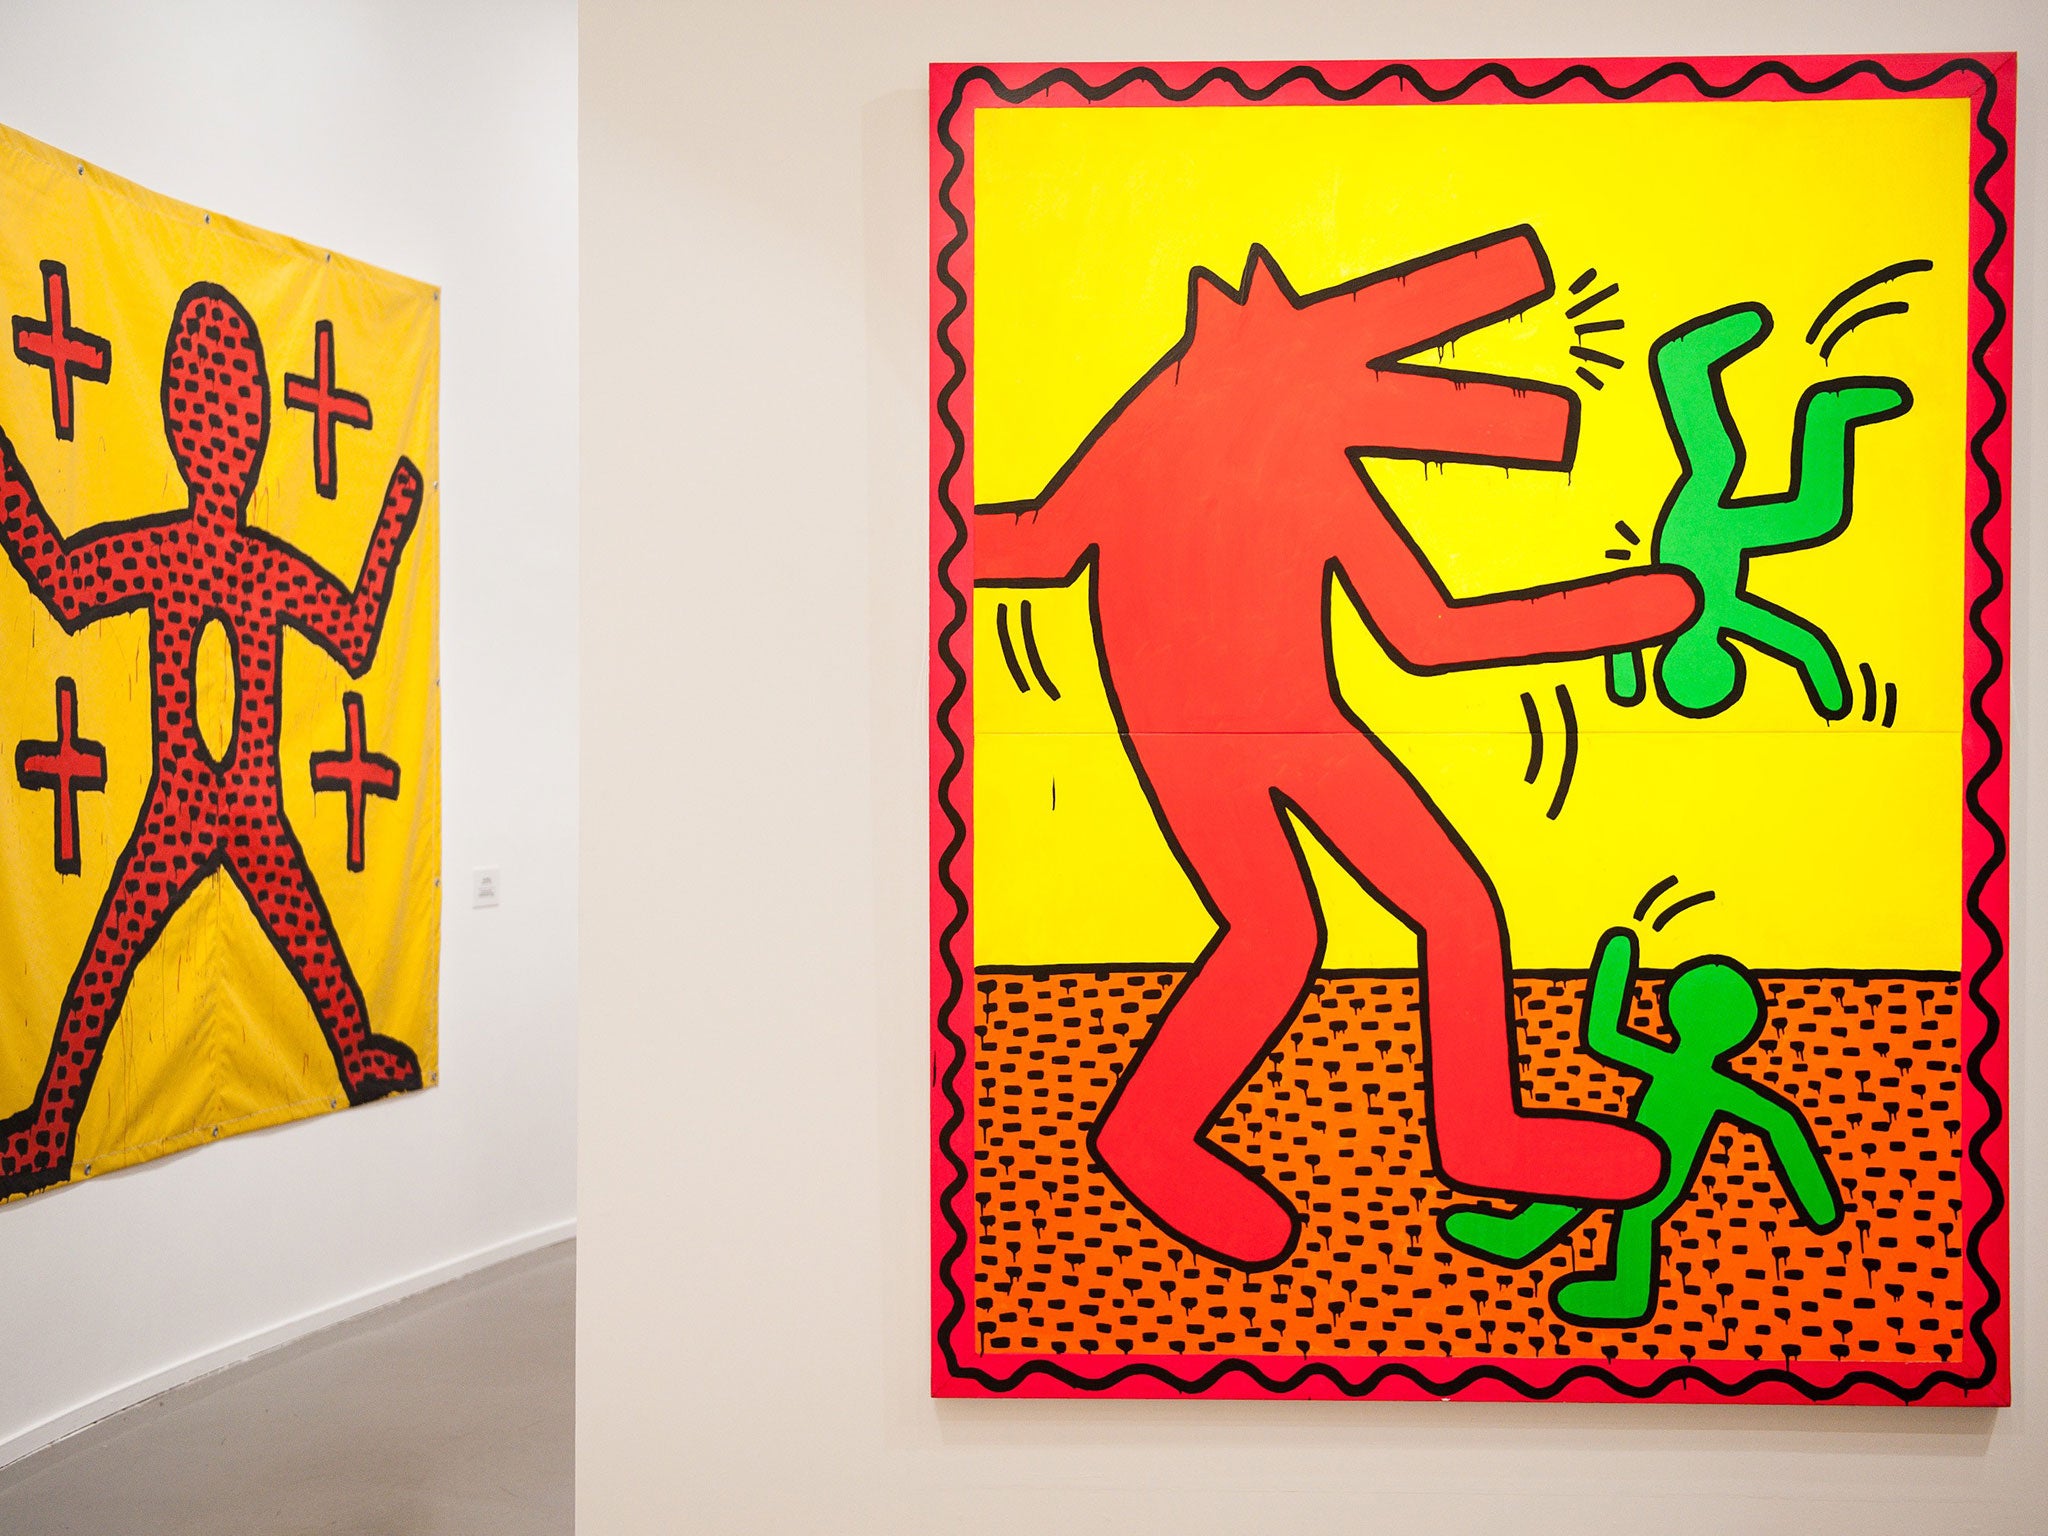 A real Keith Haring piece